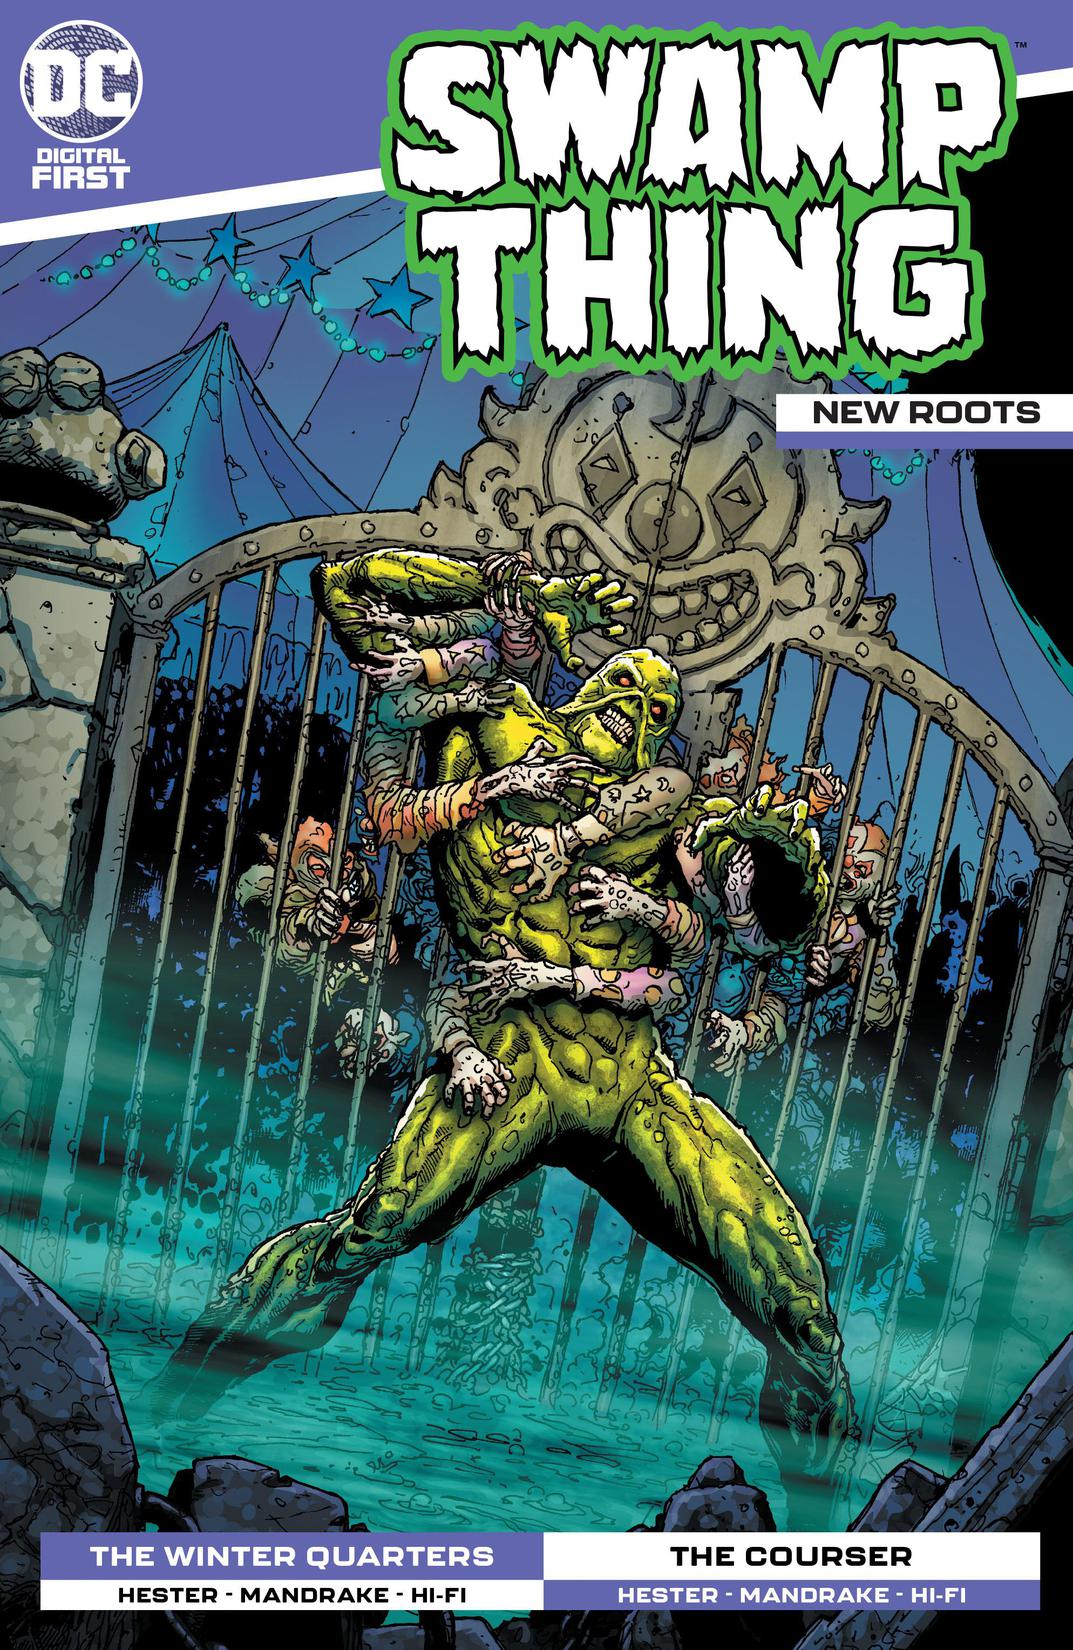 Swamp Thing: New Roots #7 preview images